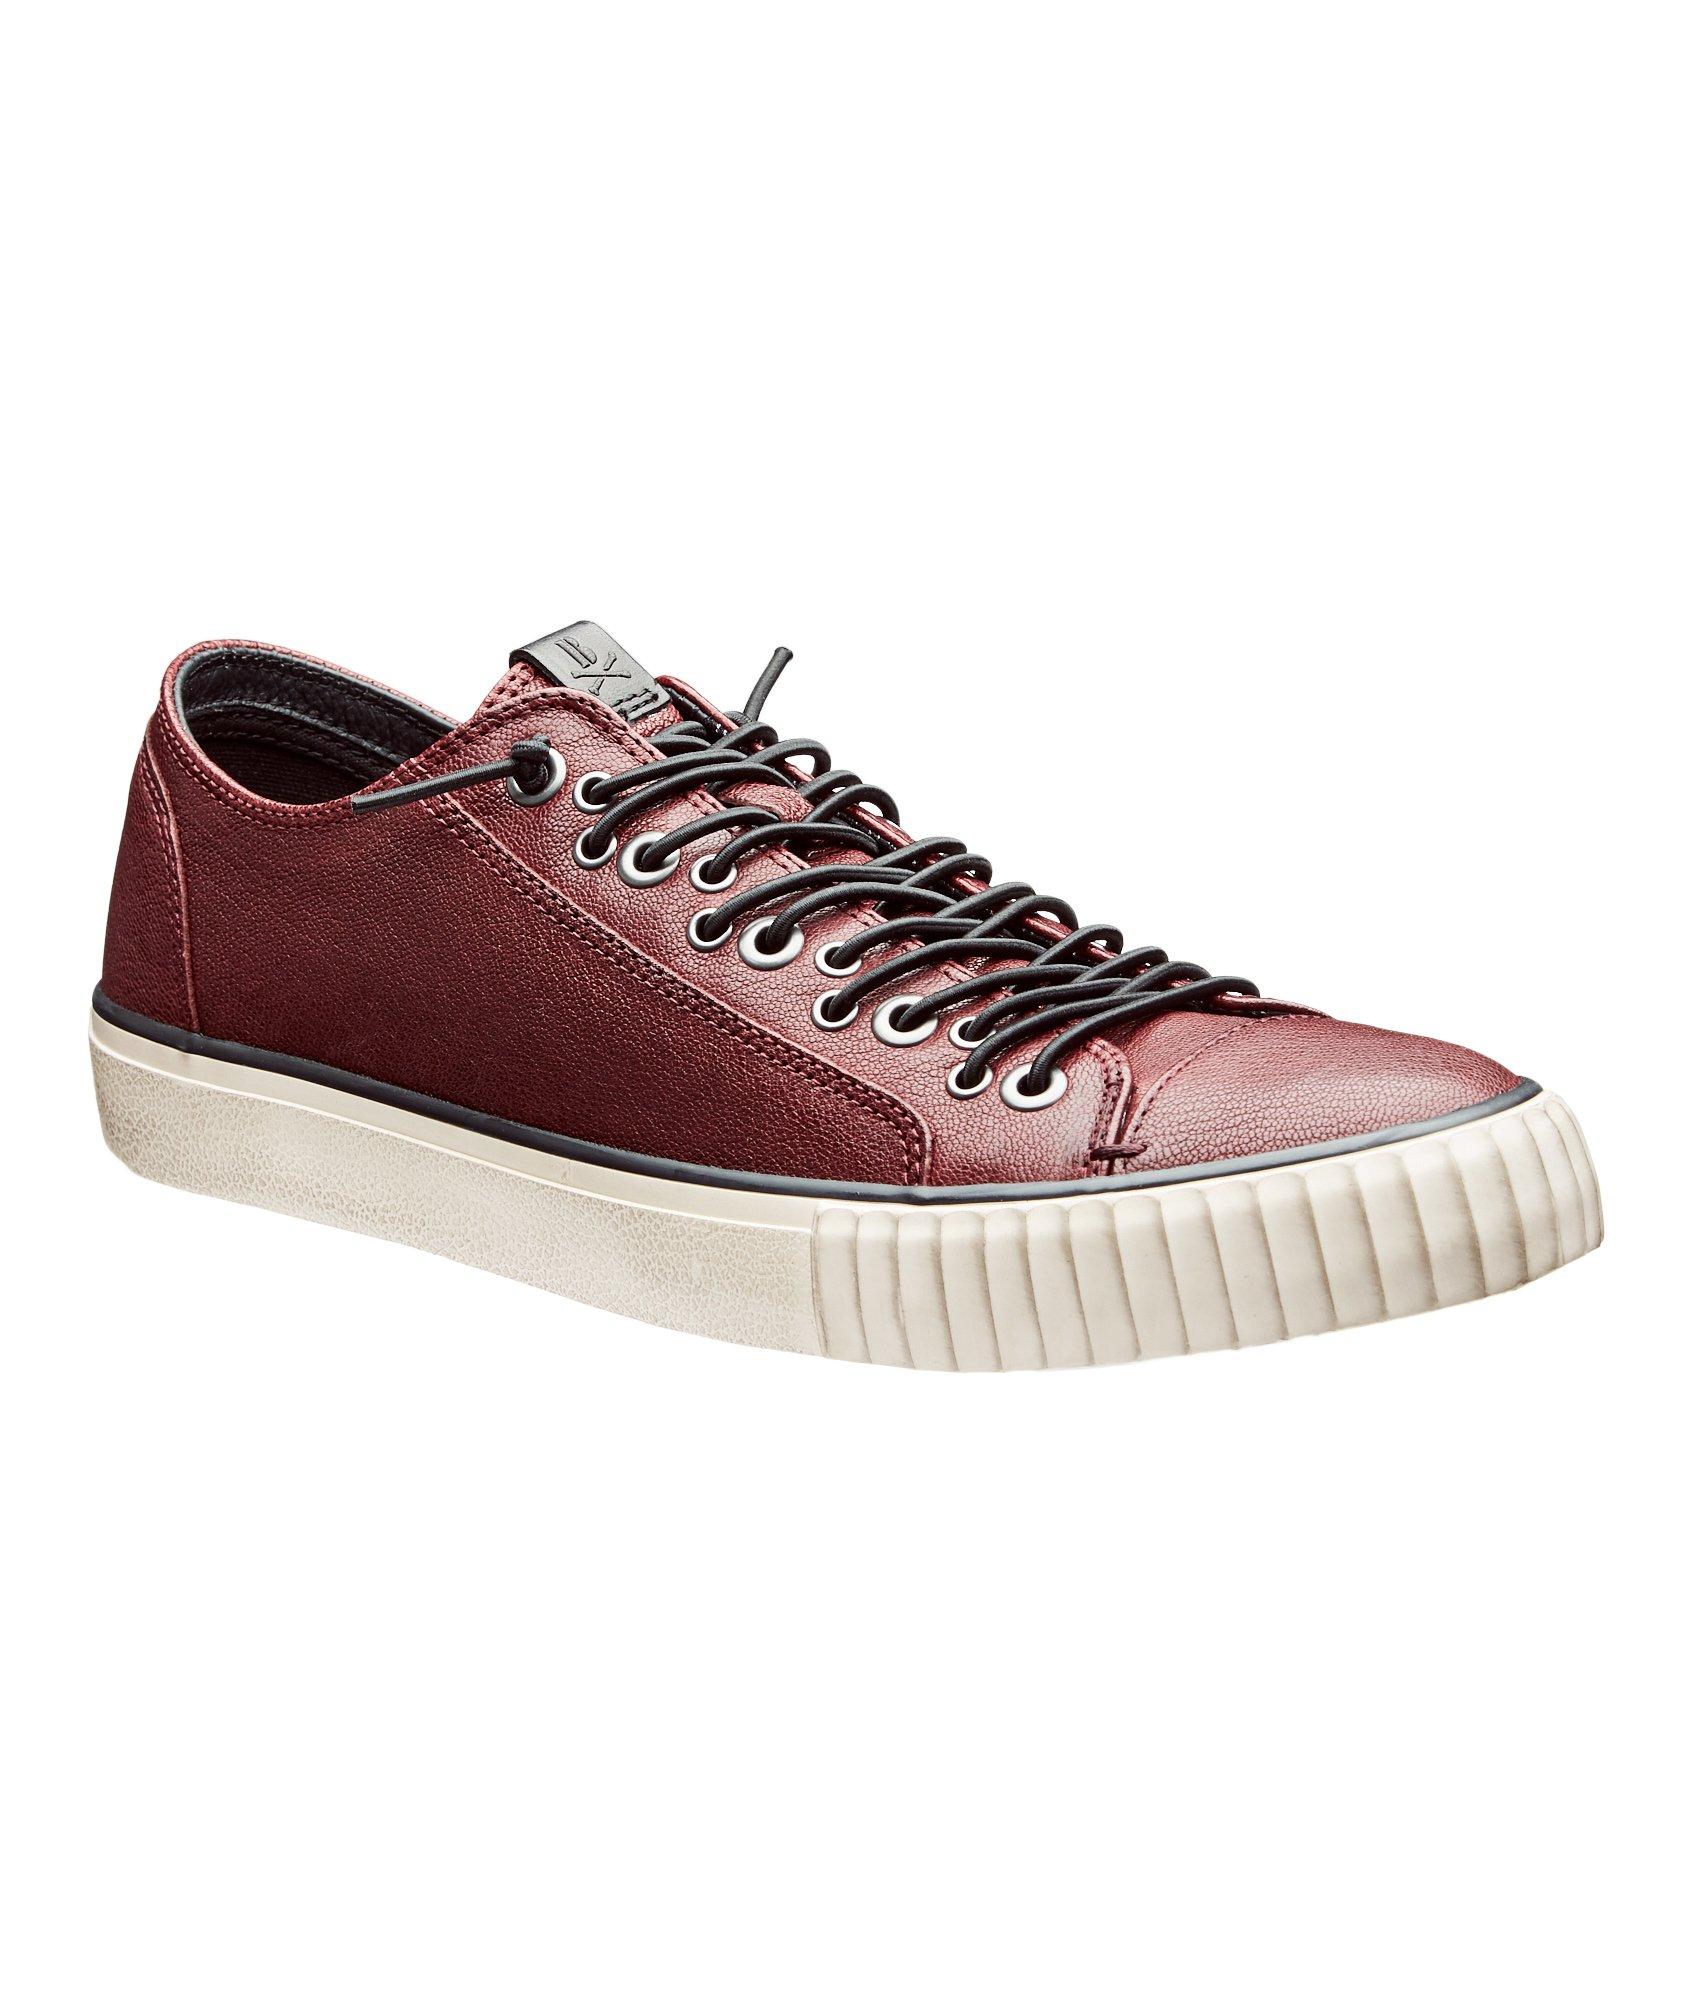 BooTLeg Leather Low-Top Sneakers image 0